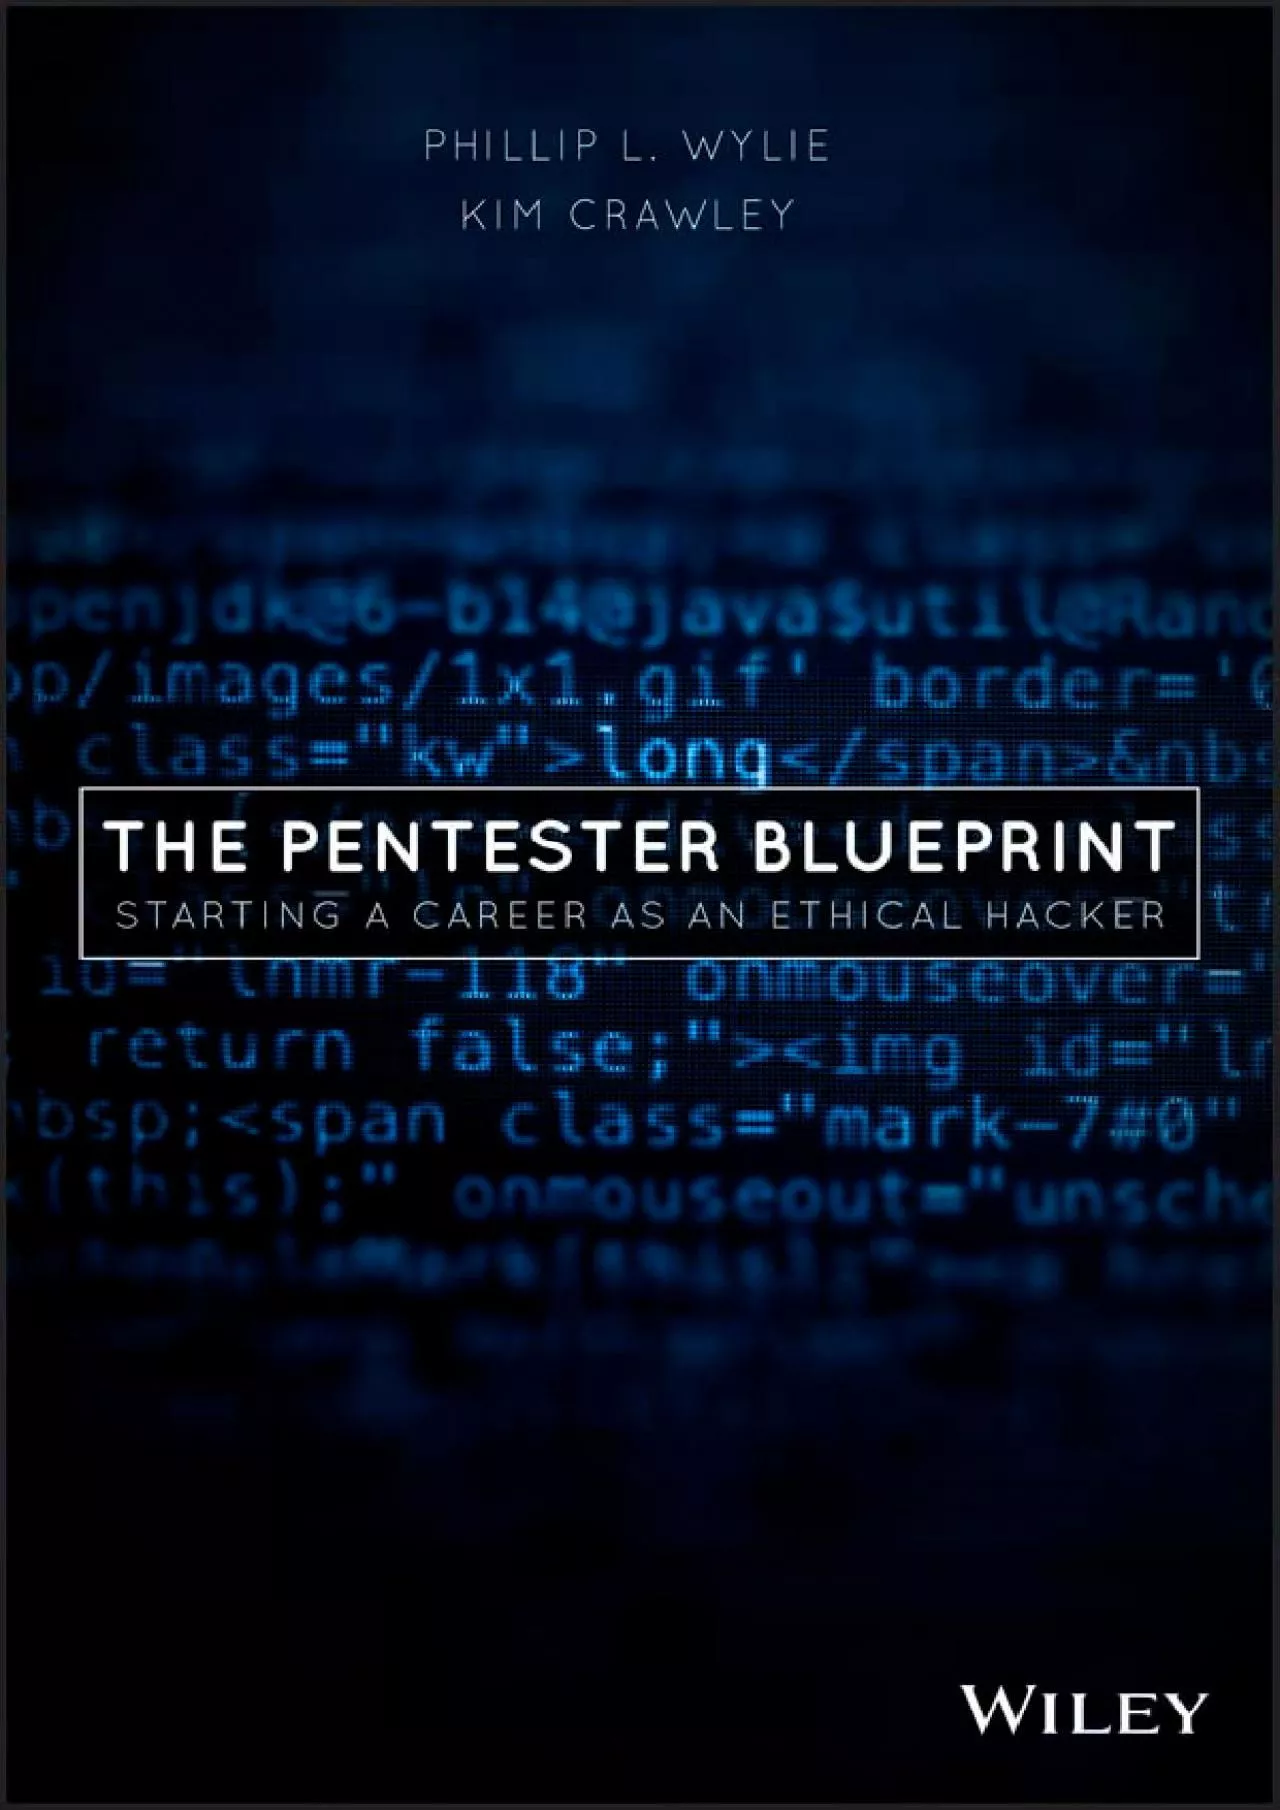 (DOWNLOAD)-The Pentester BluePrint: Starting a Career as an Ethical Hacker